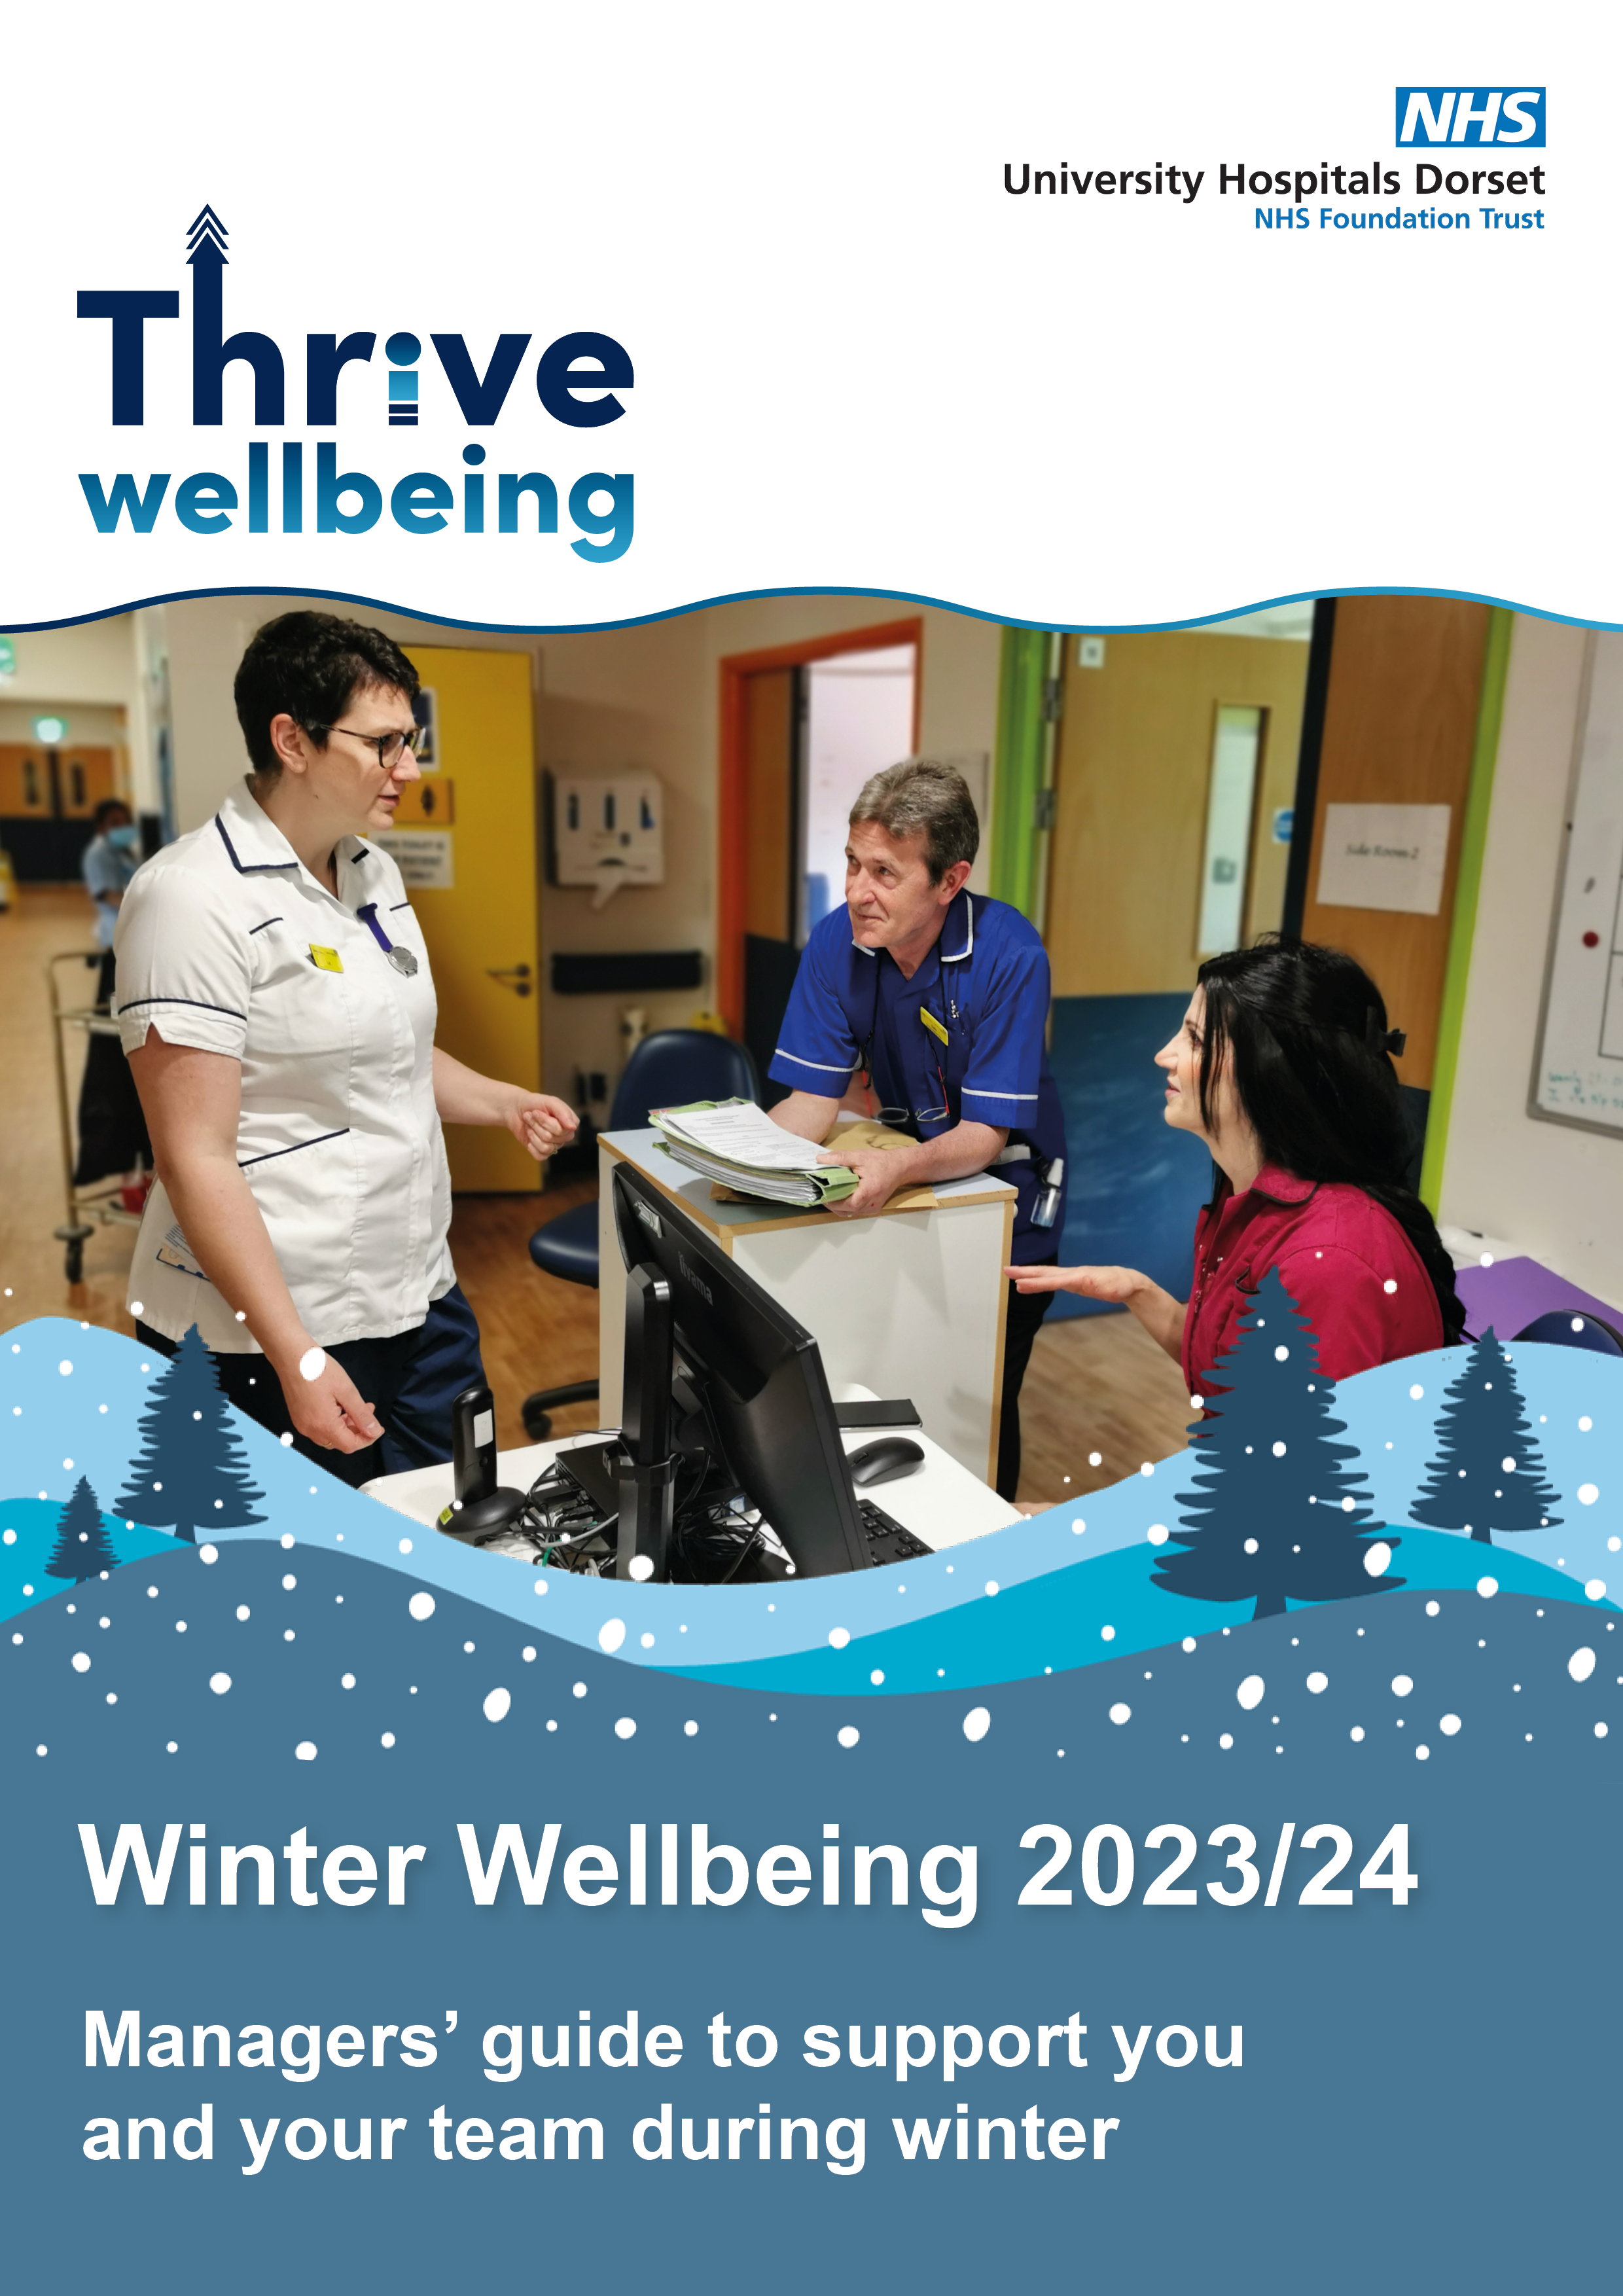 winter wellbeing guide for managers 2023